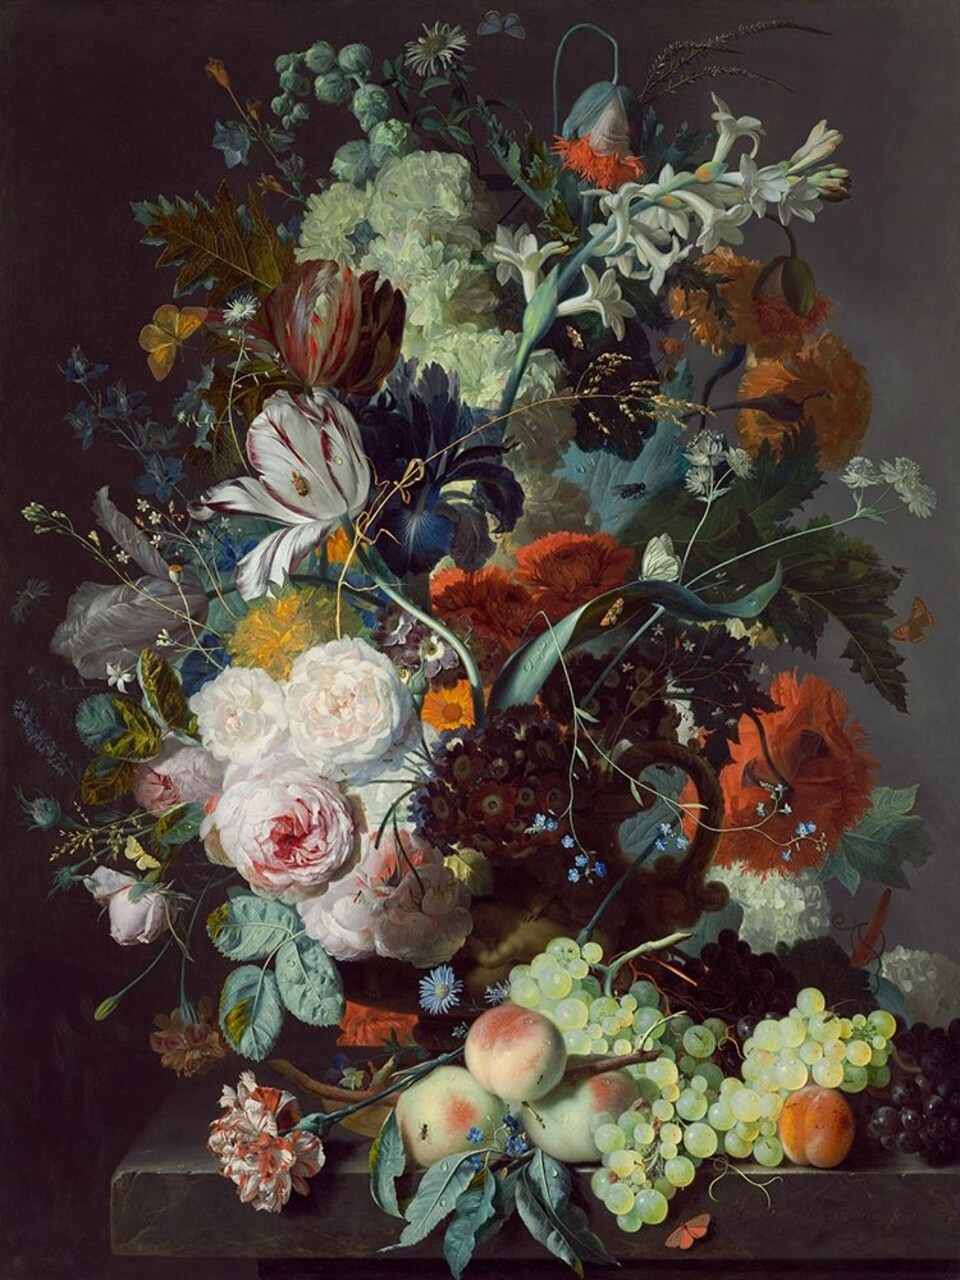 Still Life with Flowers and Fruit Poster Print by van Huysum Jan - Item # VARPDX3AA4365